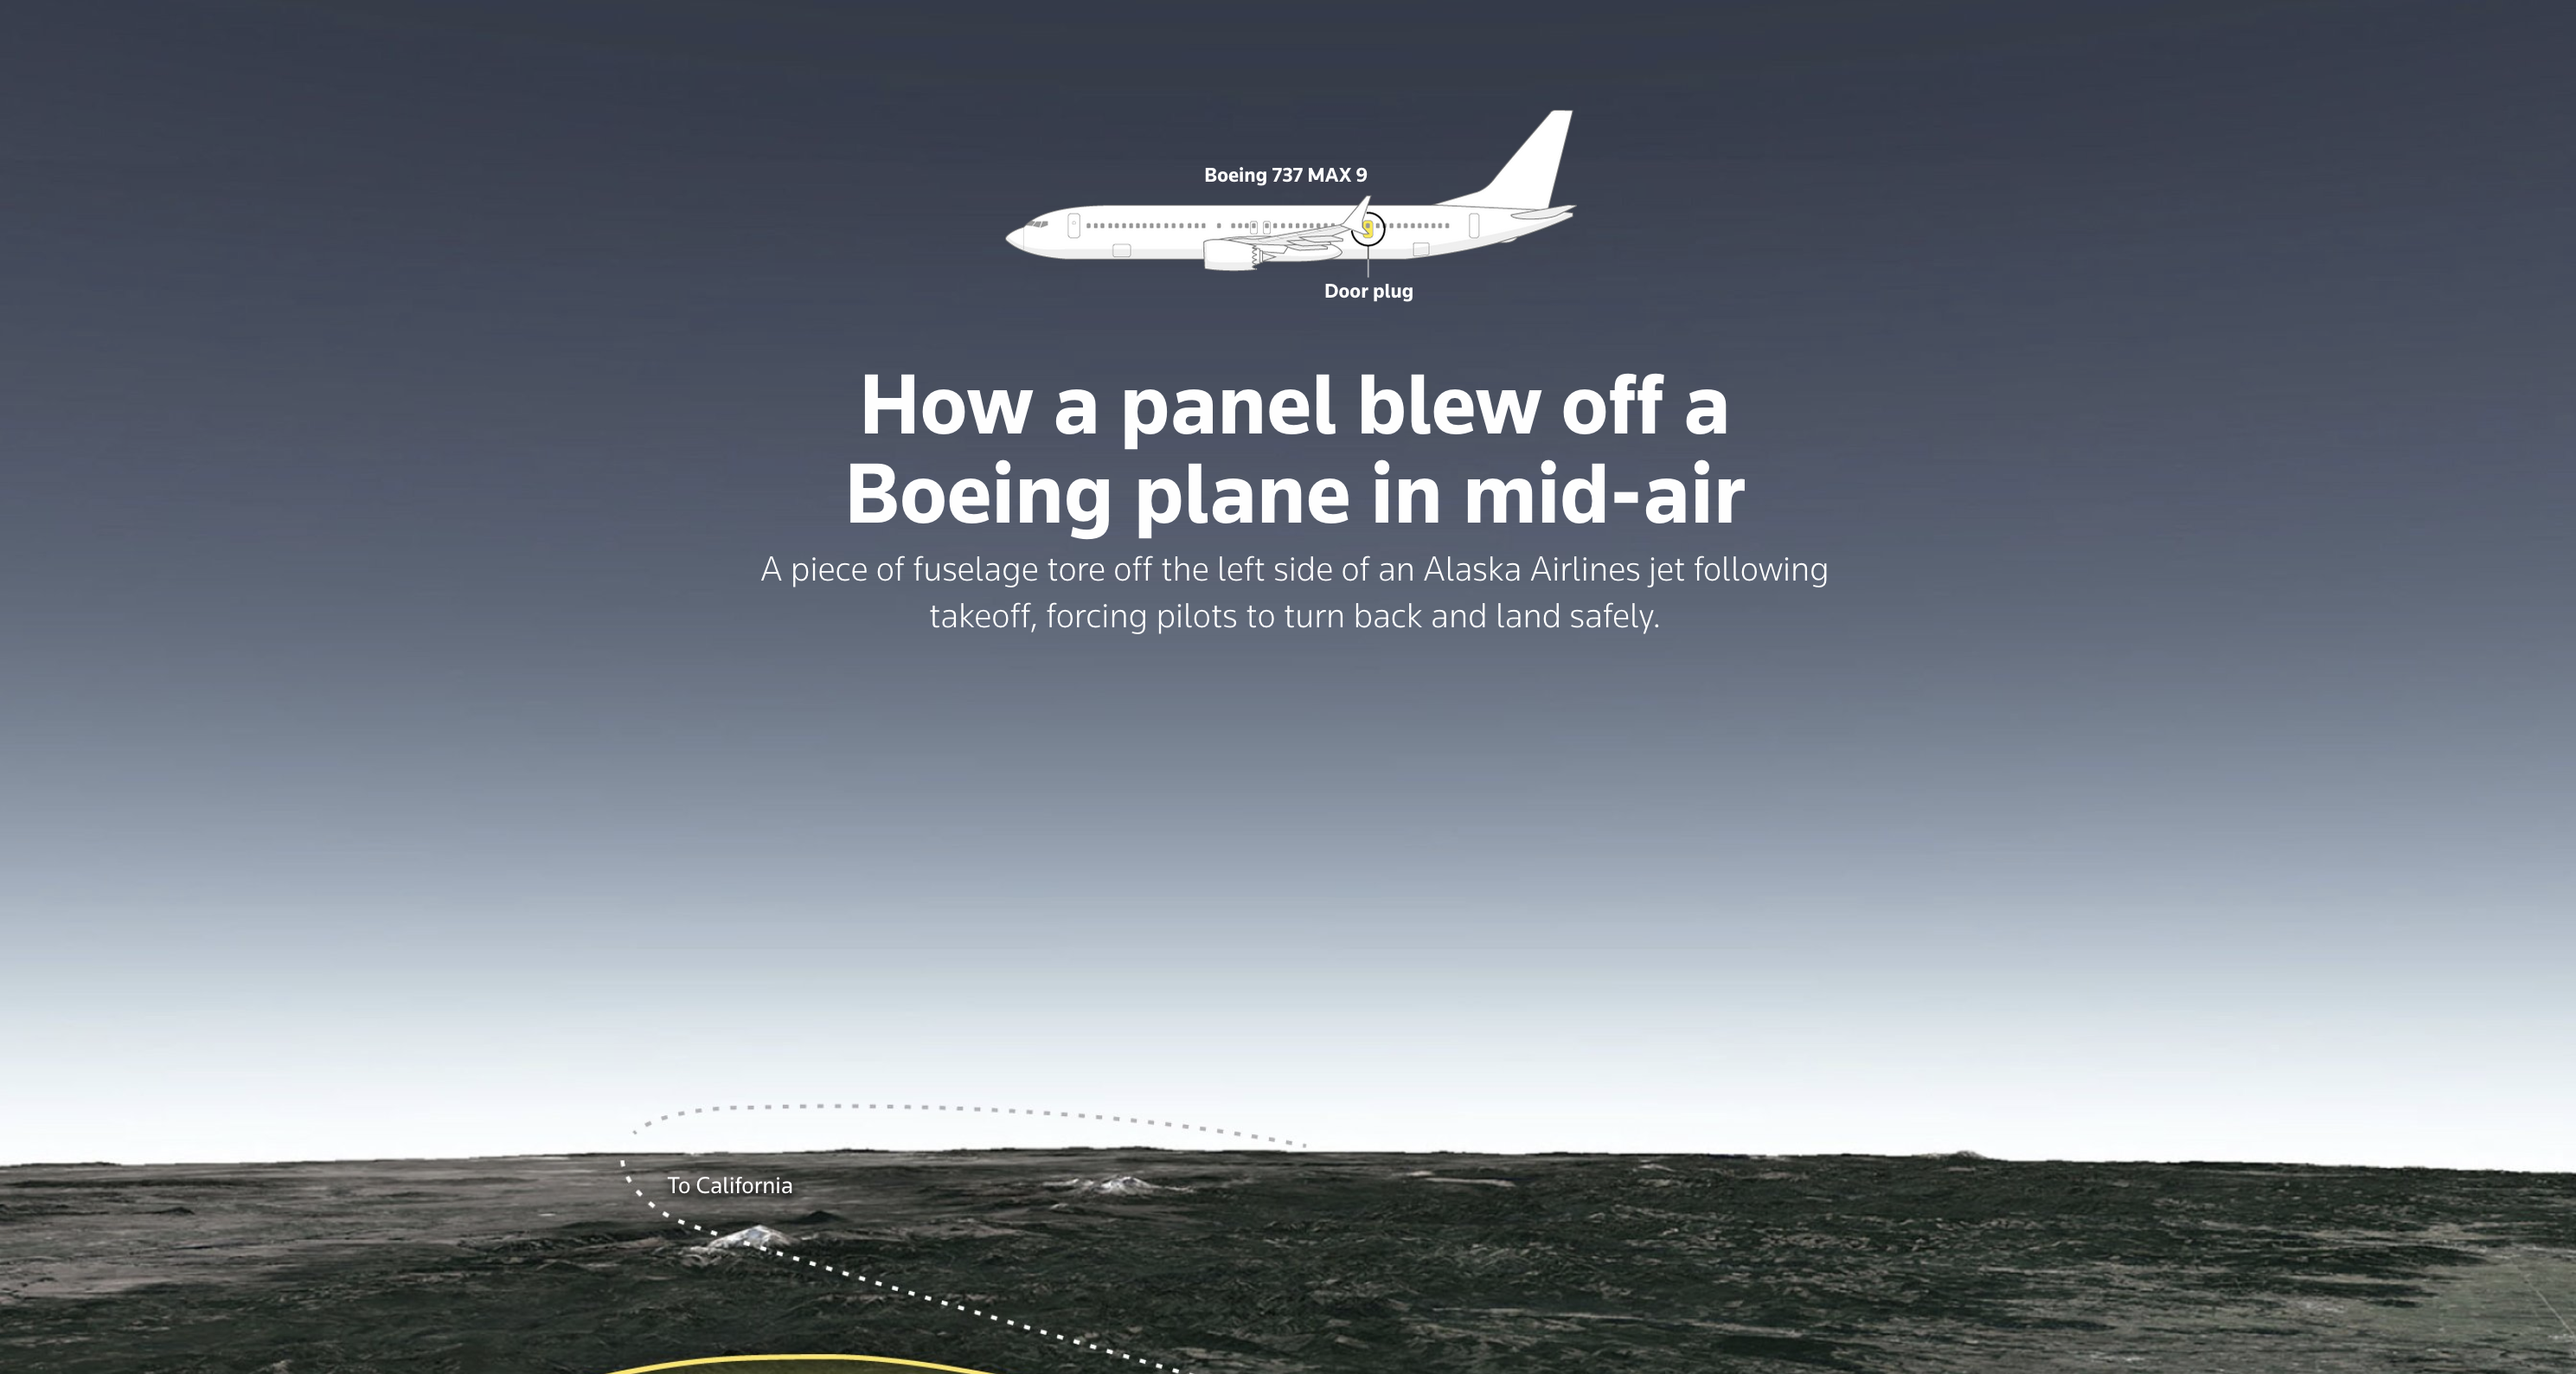 The title "How a panel blew off a Boeing plane in mid-air" with an image of a plane above. Background: View of the Earth from a cockpit, mostly sky with a thin terrestrial band